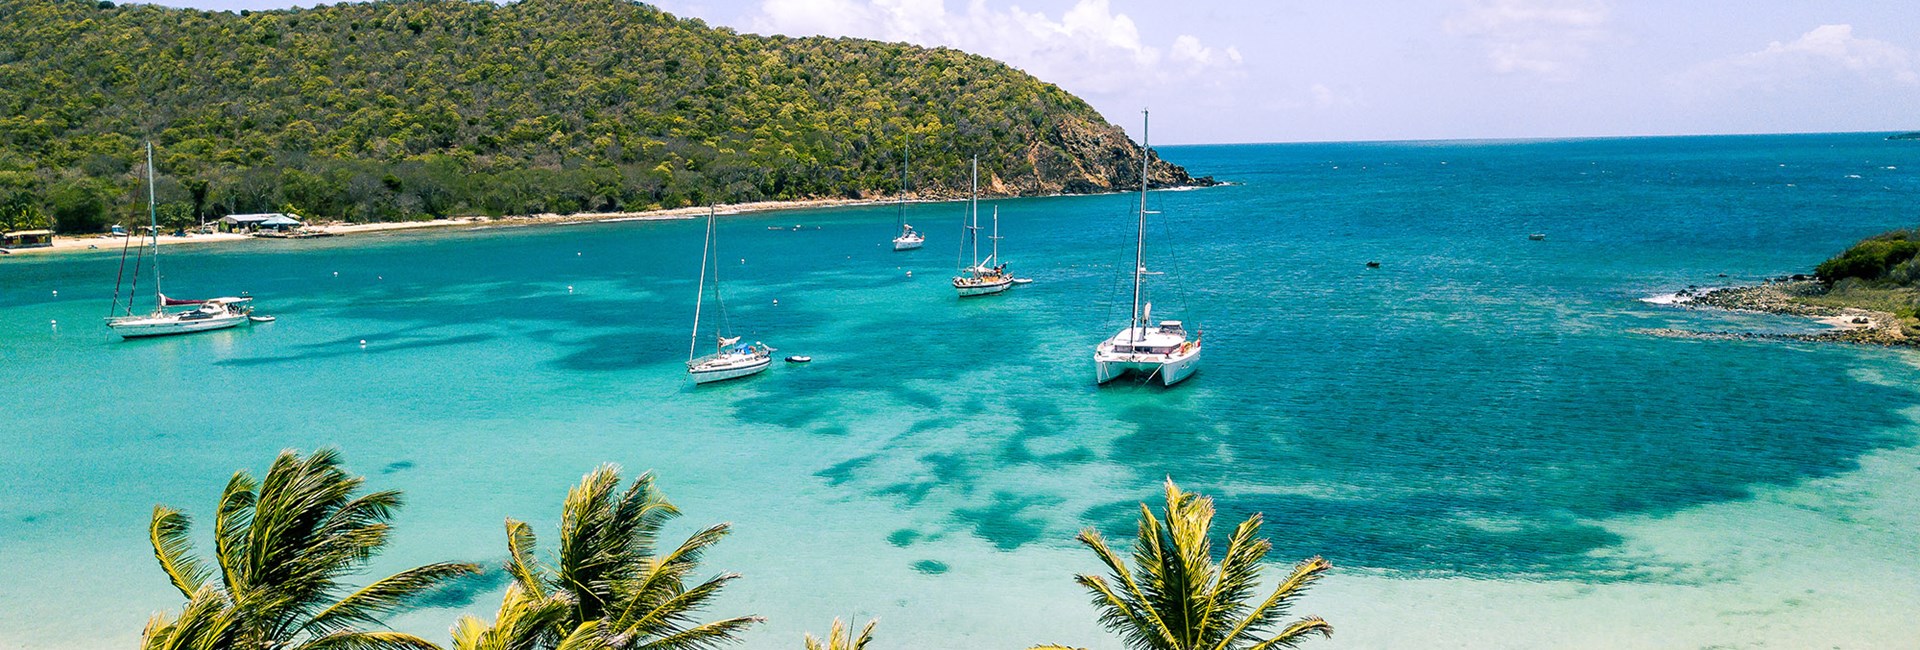 Aerial view of white sand Caribbean beach with sailing boats docked in the bay